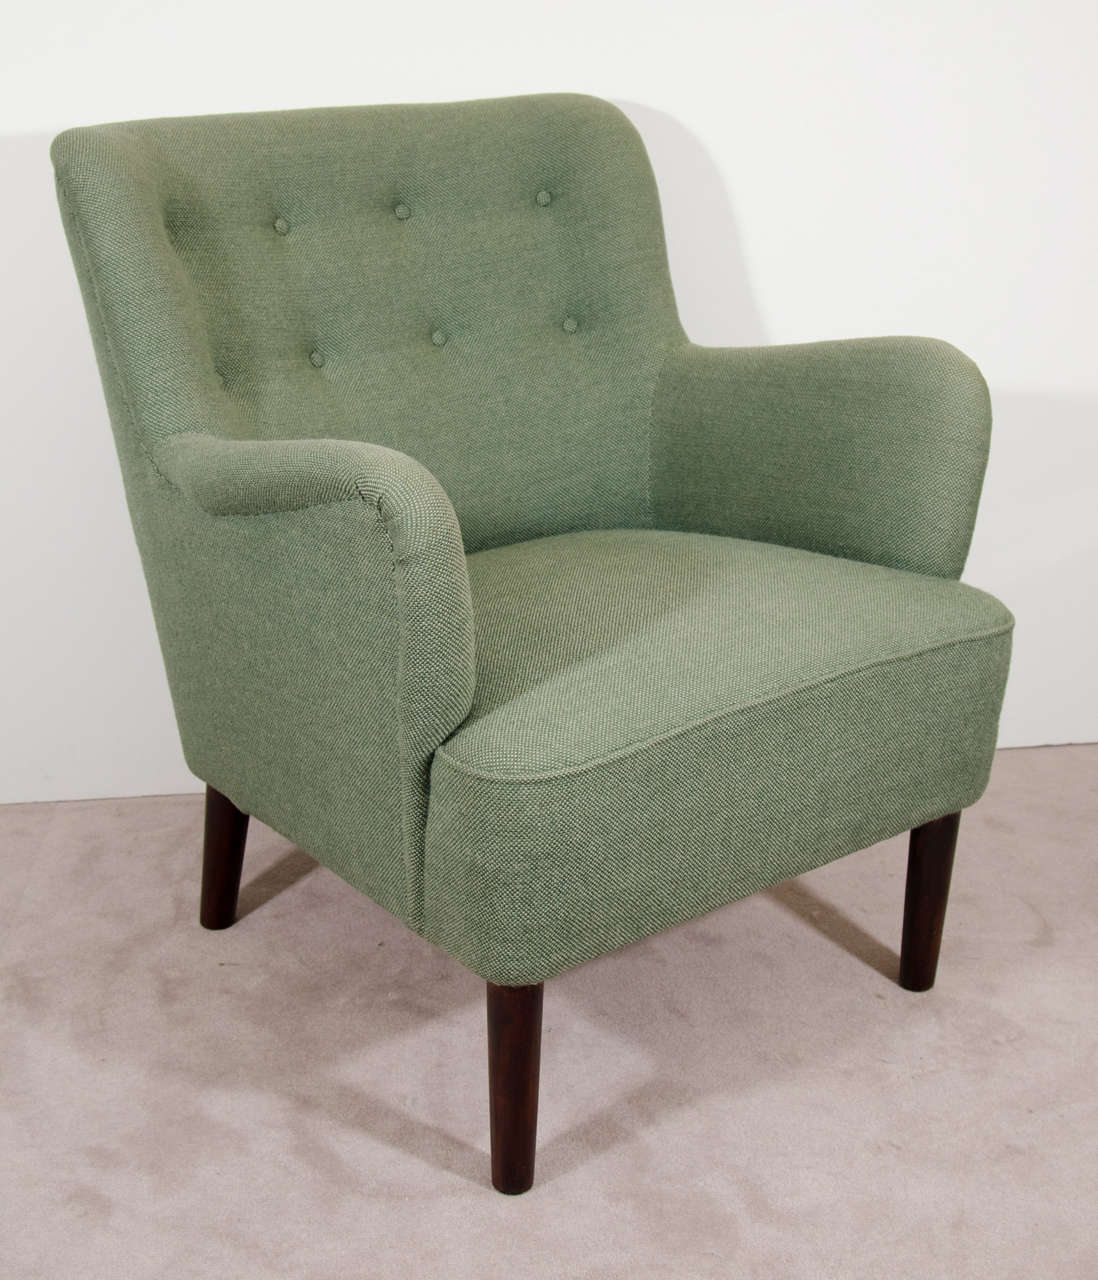 A Scandinavian pair of easy chairs or armchairs in button tufted green wool upholstery.